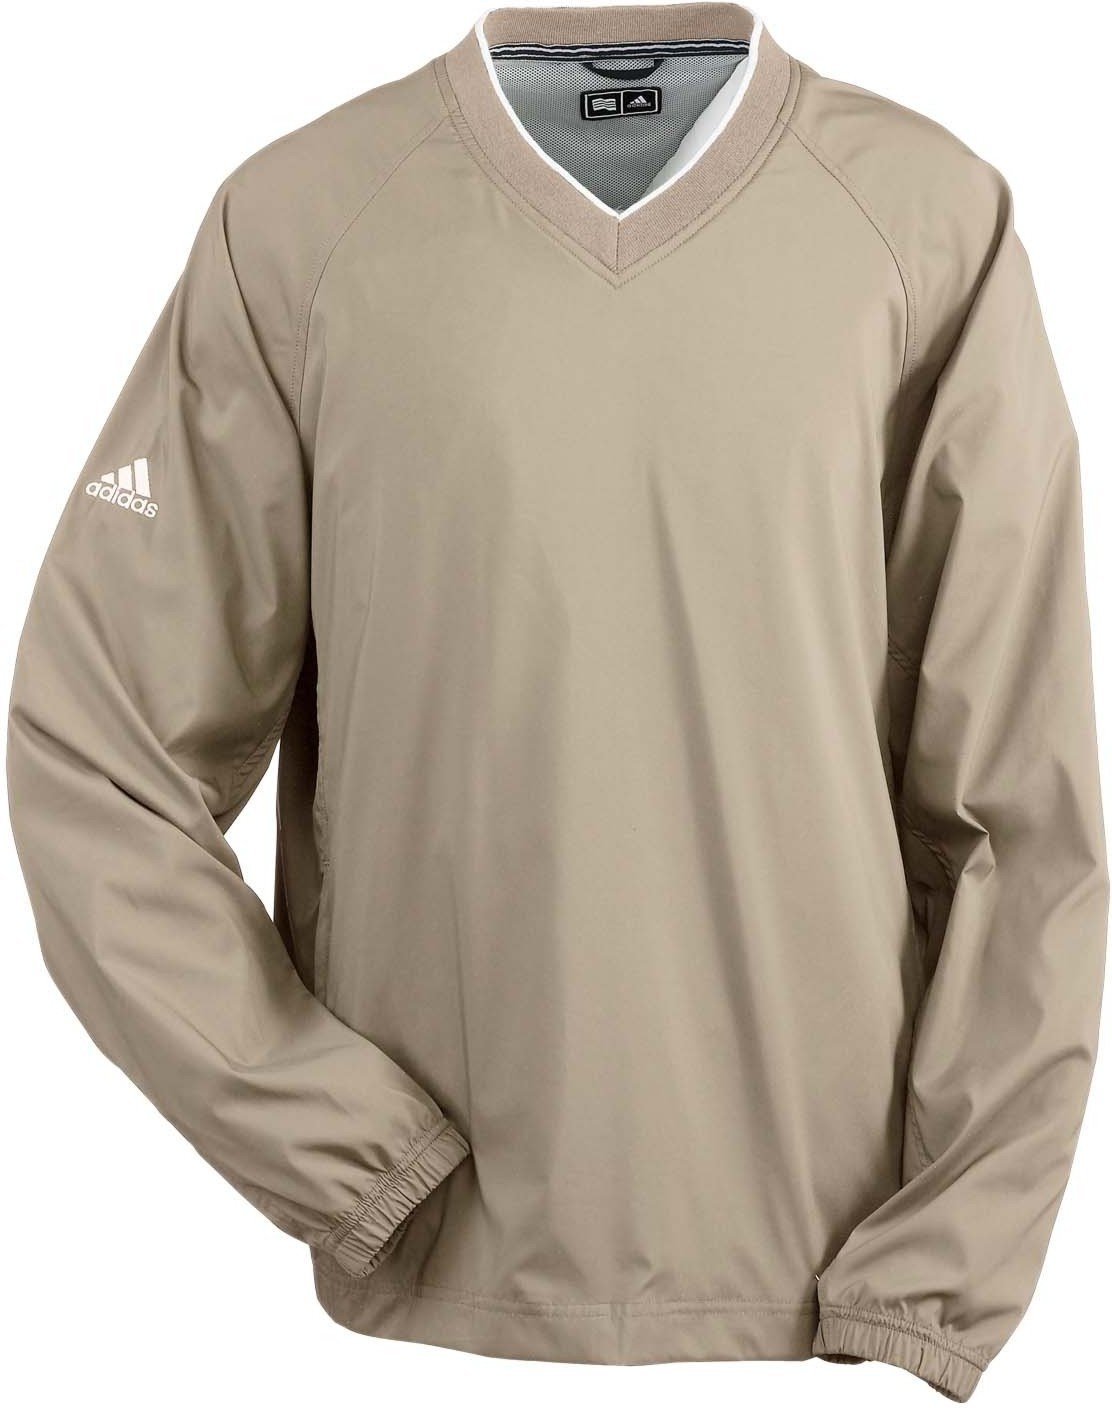 Mens A47 Climaproof V-Neck Golf Wind Pullovers